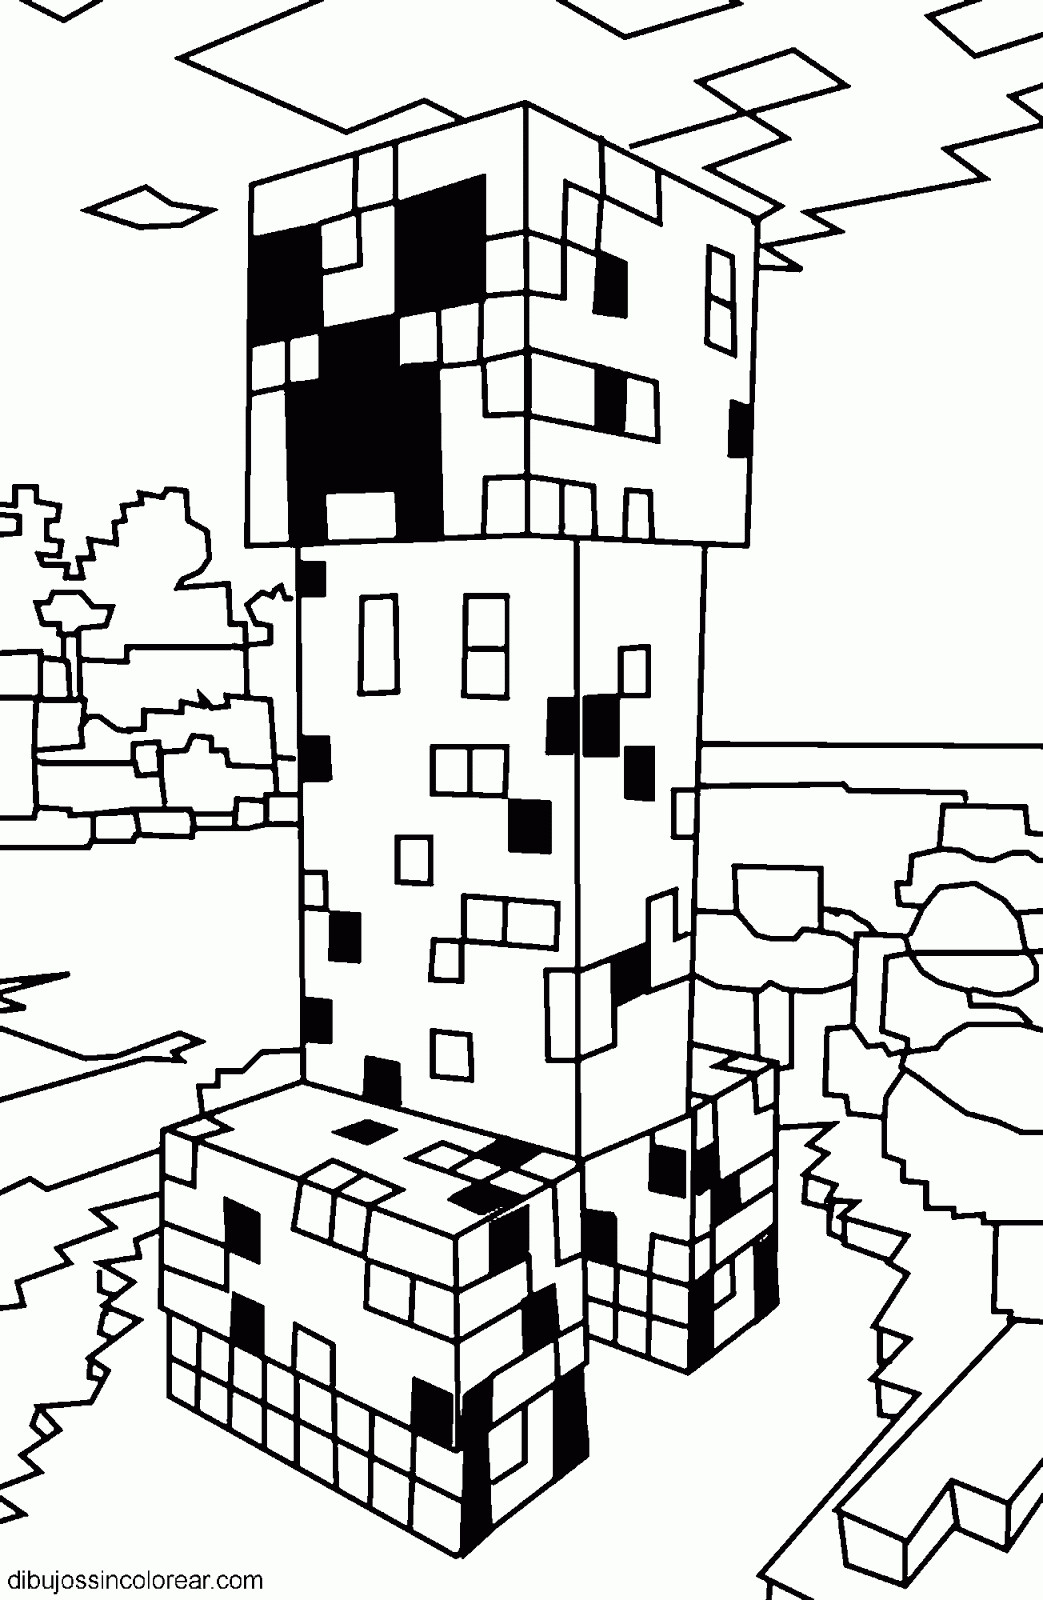 Minecraft Free Coloring Pages
 Dibujos Sin Colorear Dibujos de Minecraft para Colorear